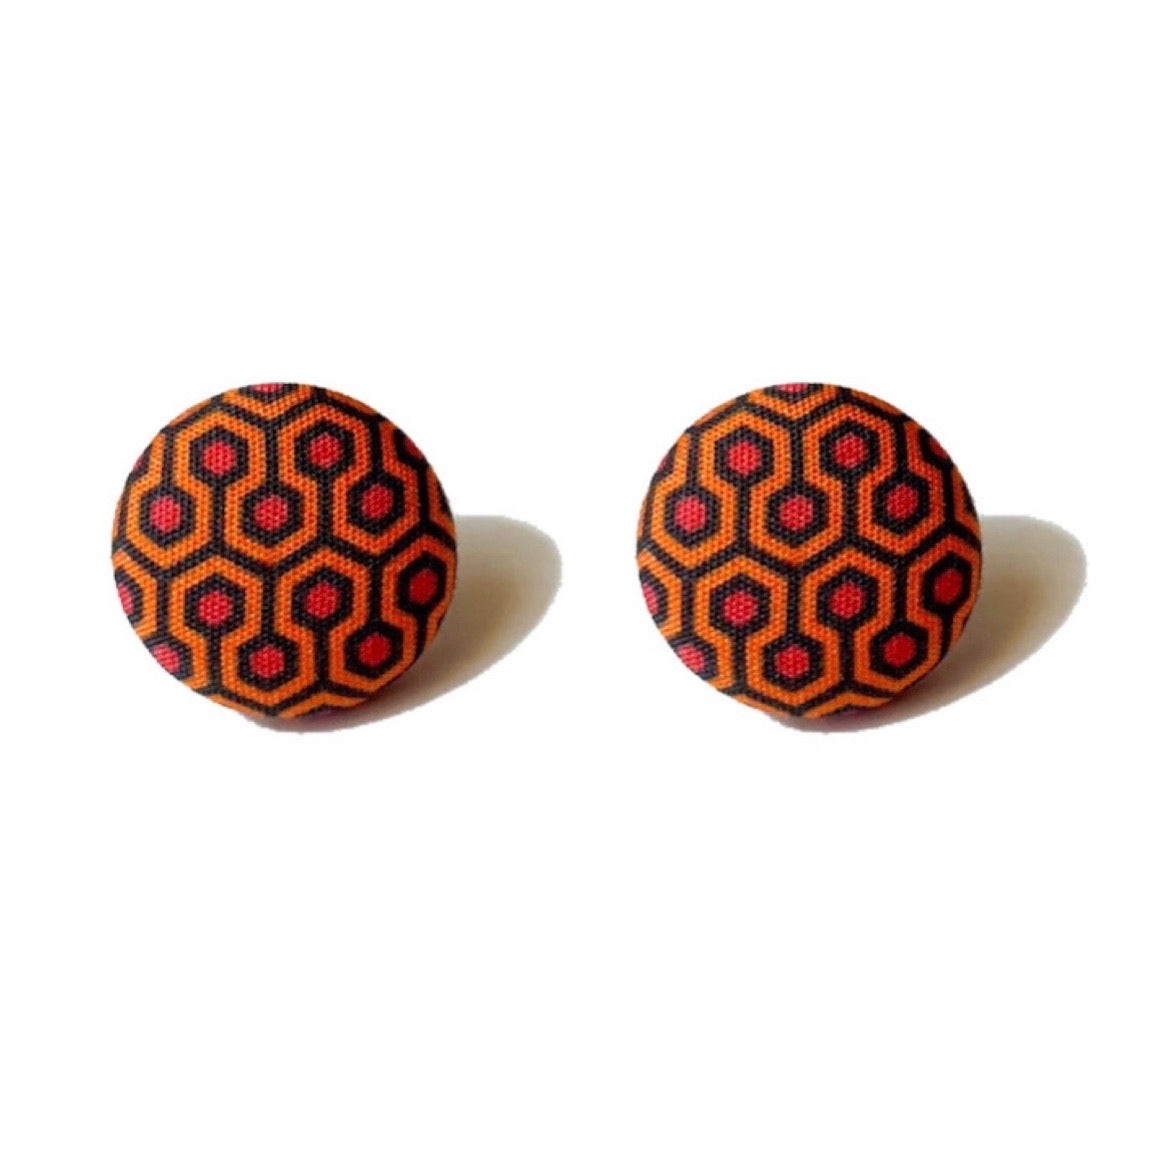 Overlook Hotel Carpet Print The Shining Fabric Button Earrings